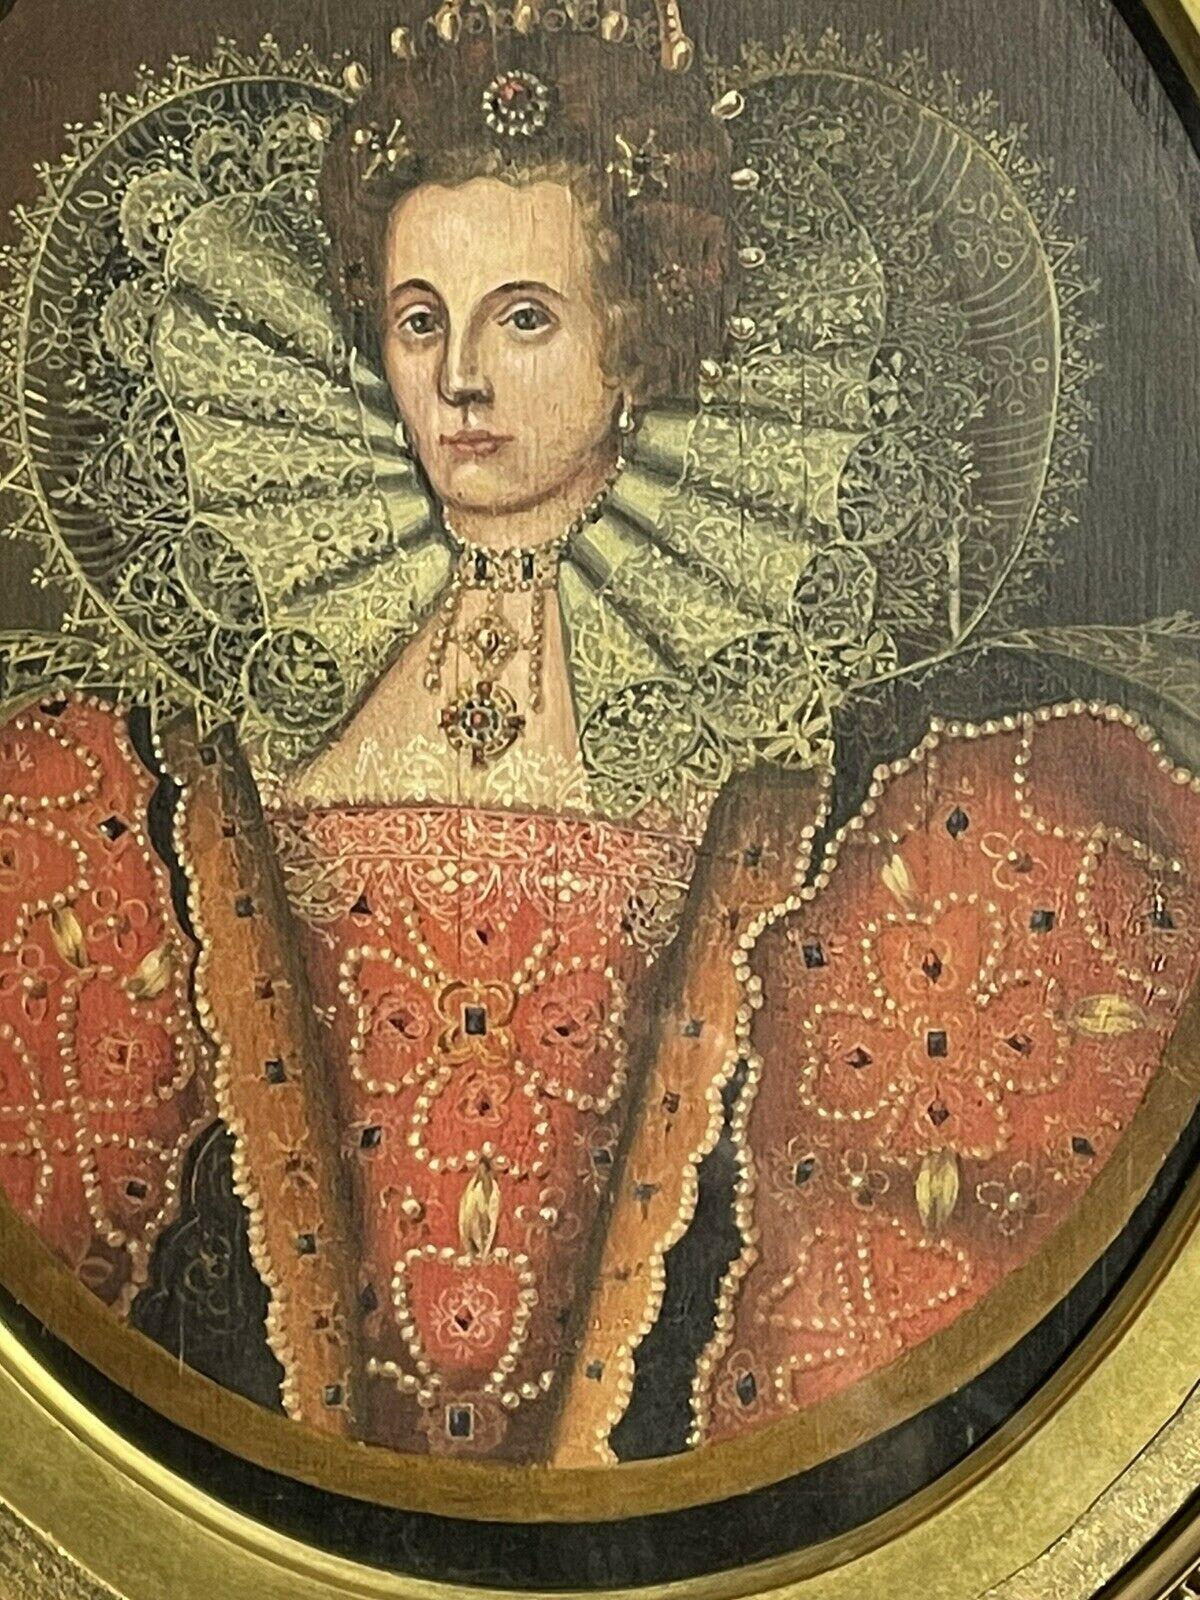 ANTIQUE ENGLISH OIL ON OVAL PANEL - PORTRAIT OF QUEEN ELIZABETH 1 - Painting by Unknown